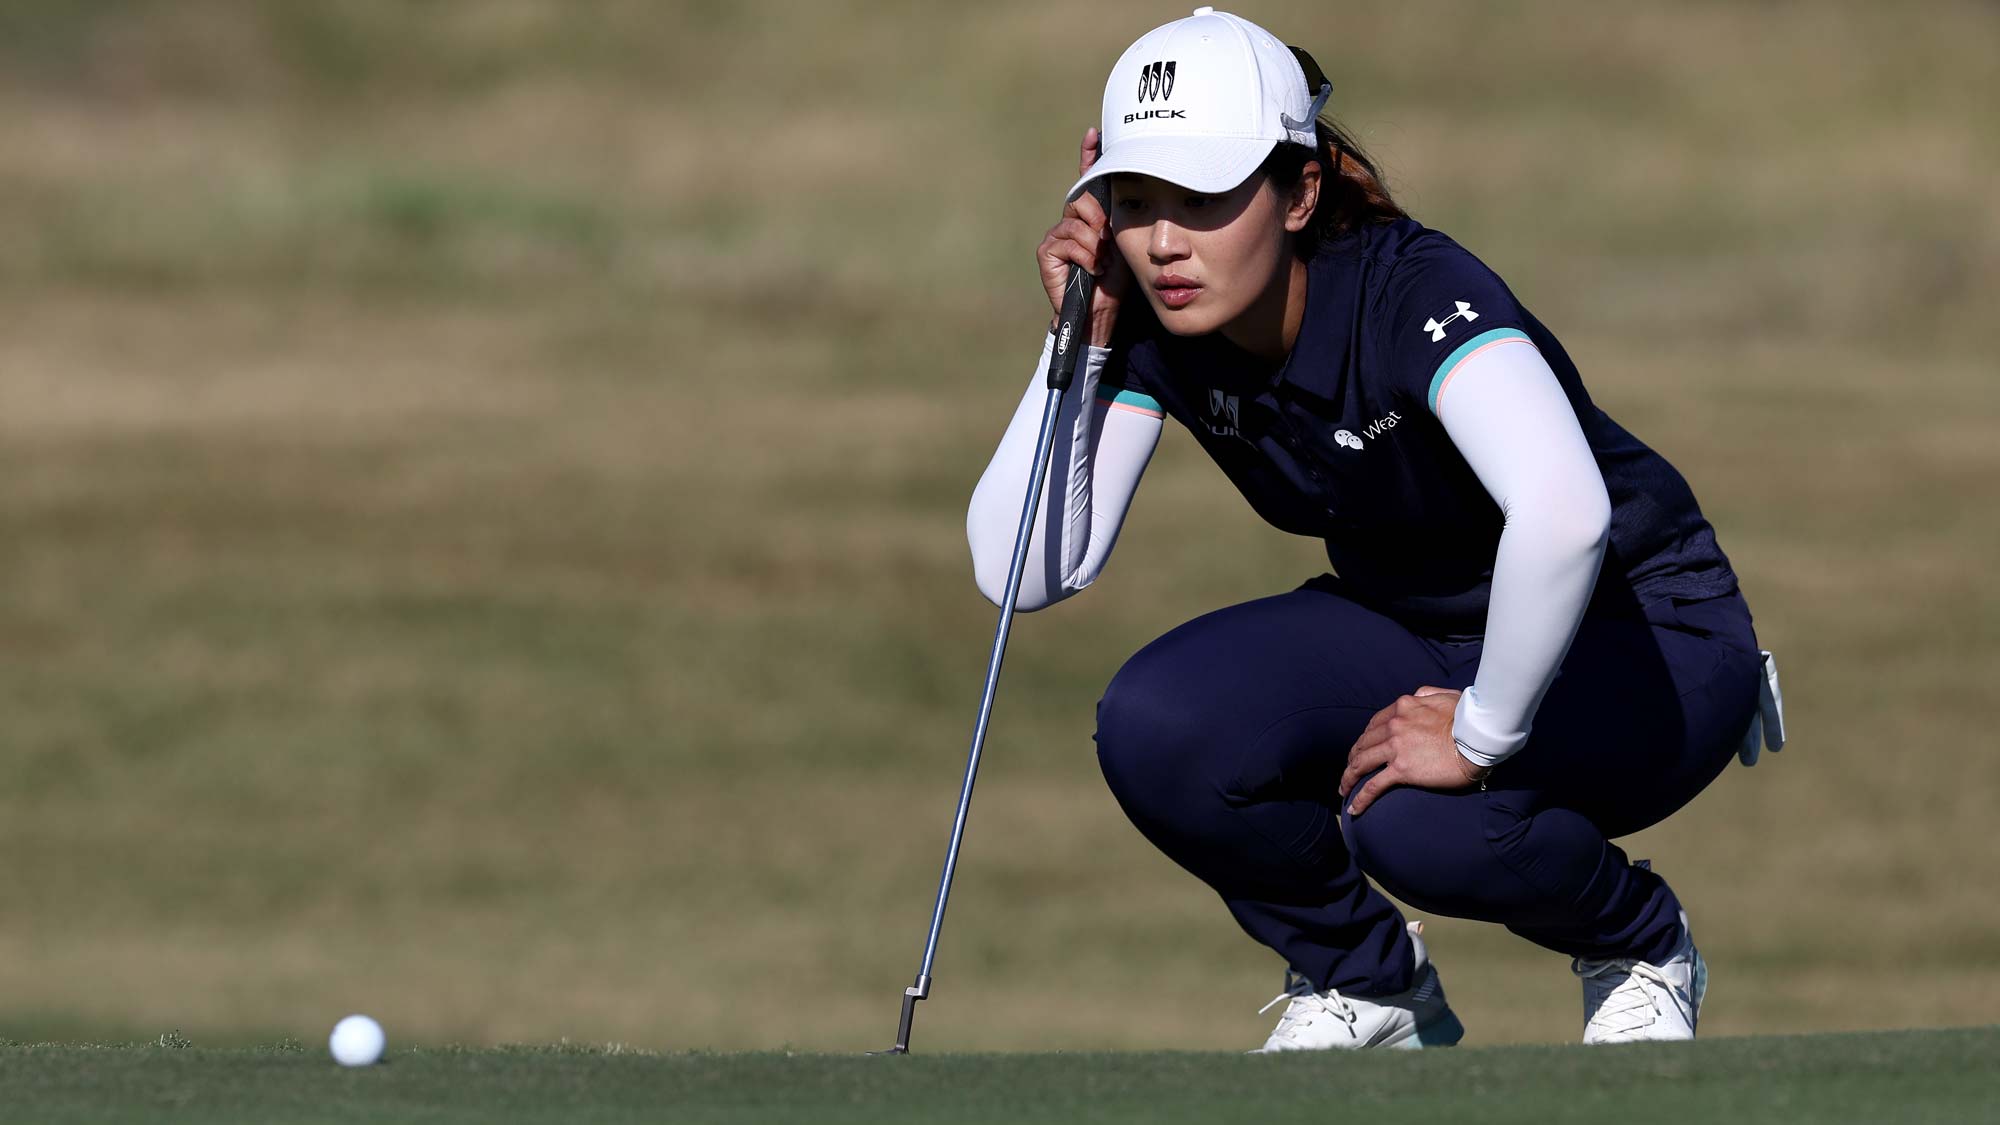 Xiyu Janet Lin of China lines up a putt on the 17th green during the second round of The Ascendant LPGA benefiting Volunteers of America at Old American Golf Club